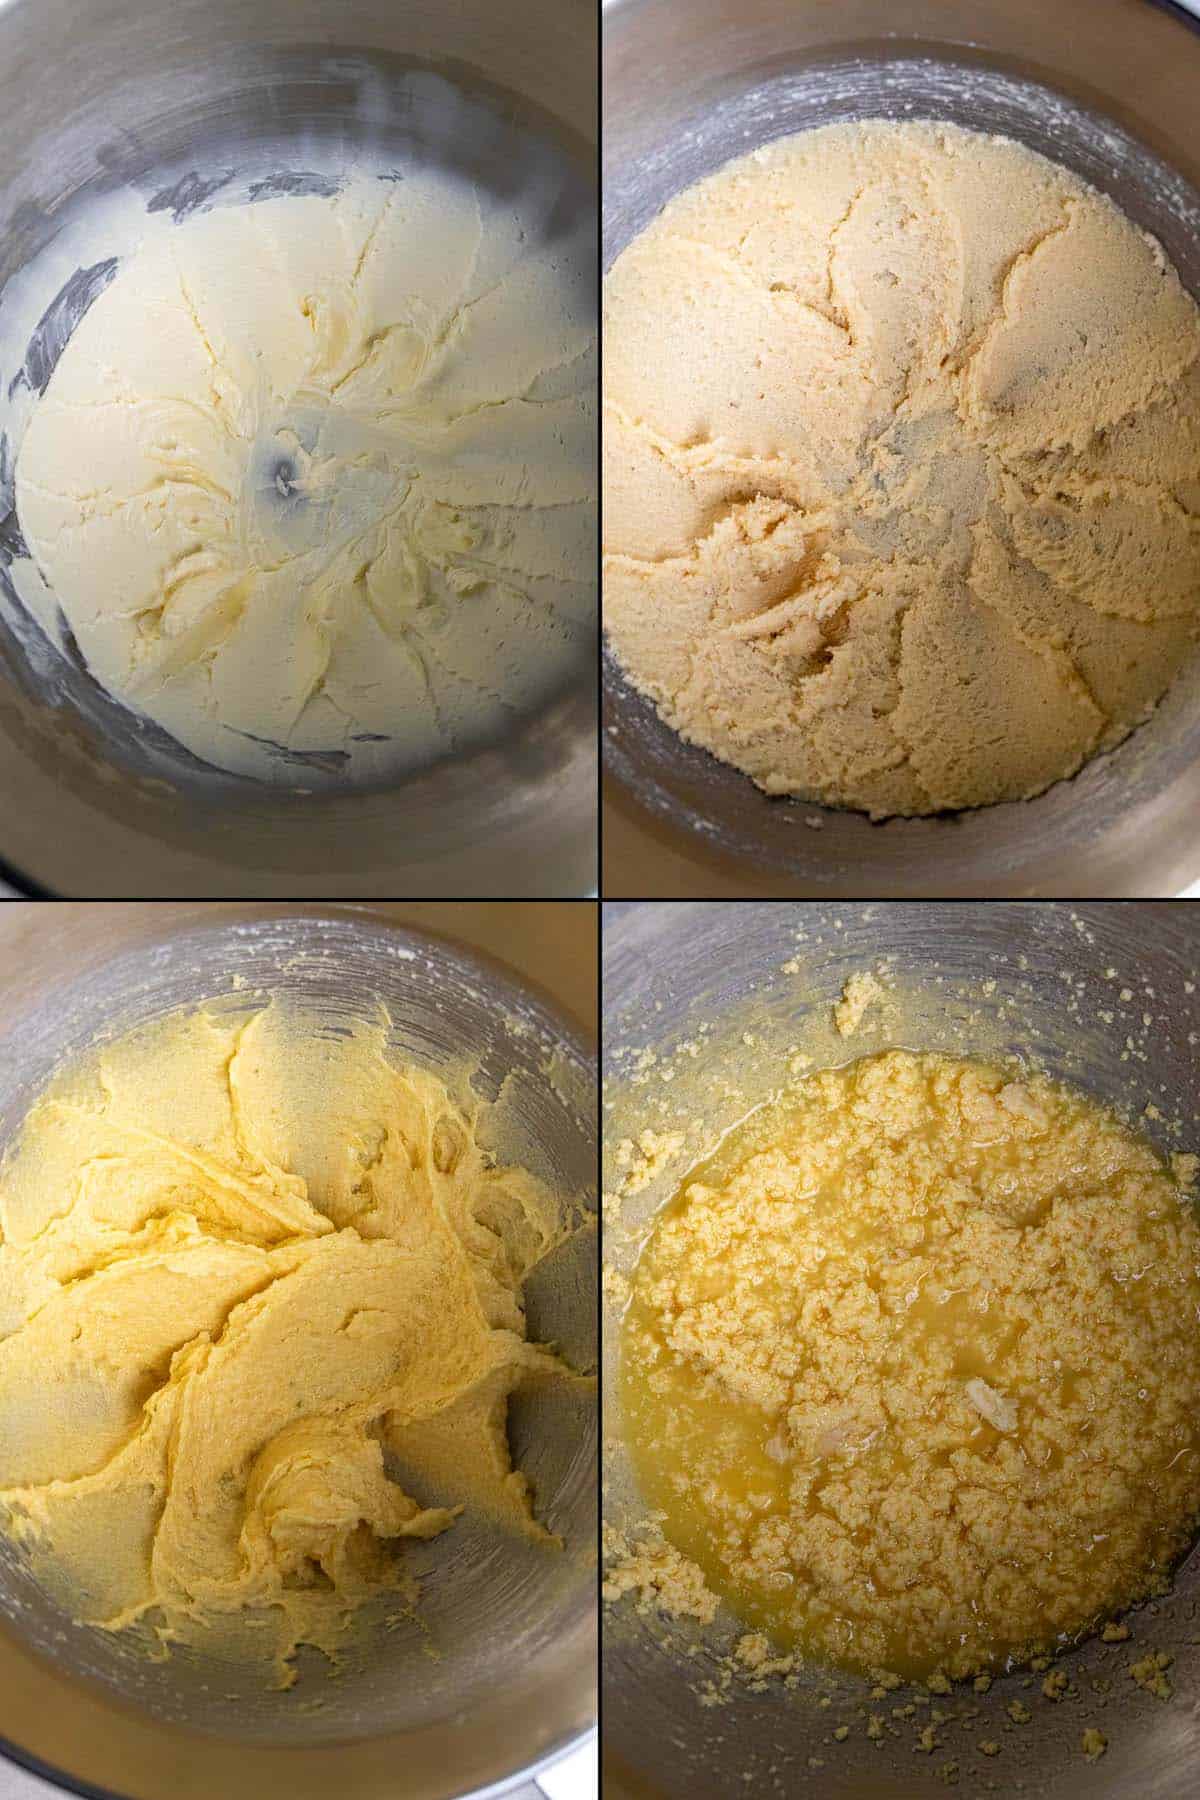 First 4 steps in making pina colada cupcakes, including whipping the butter, creaming the butter and sugar, whipping in the eggs, and mixing in the other wet ingredients. 